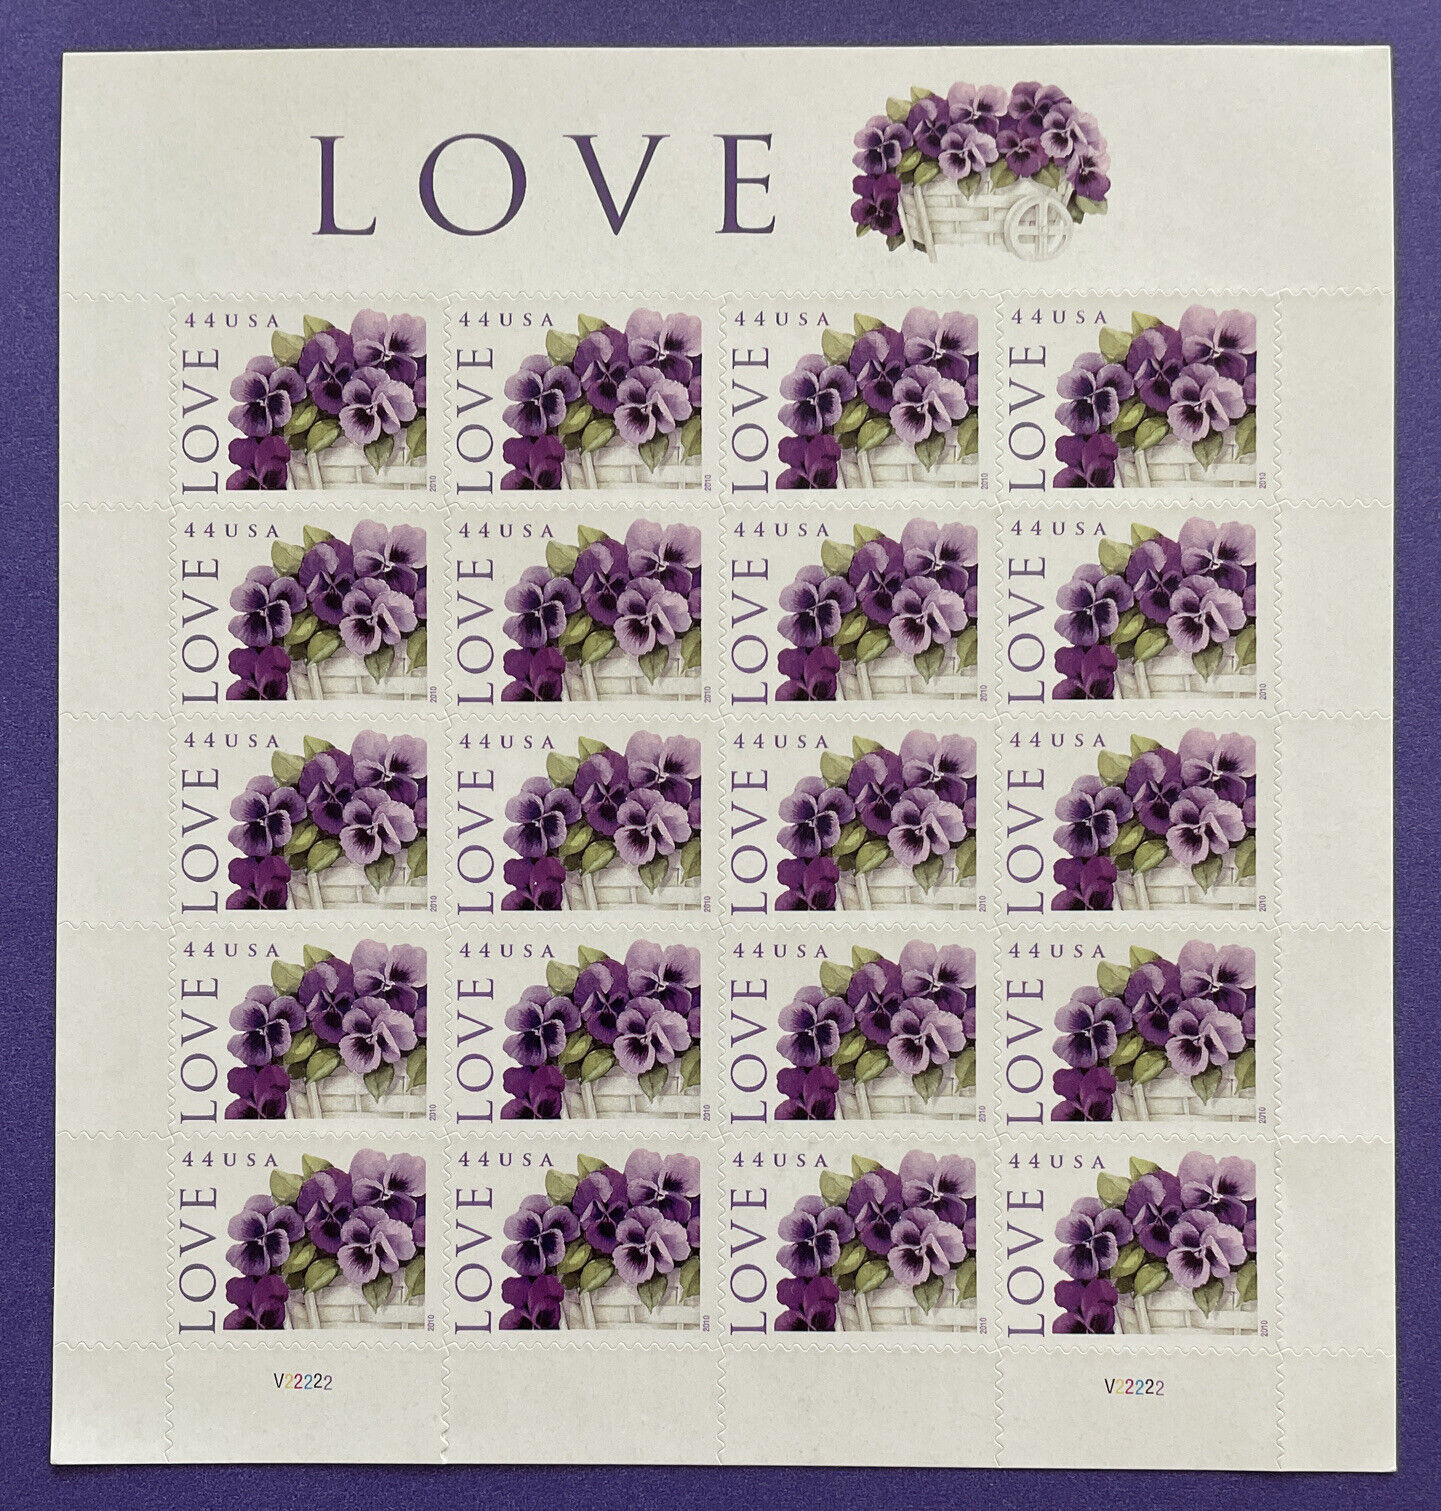 Scott 4450 LOVE PANSIES IN A BASKET of Pane 44¢ US MNH Stamps Challenge the lowest price 20 Max 63% OFF